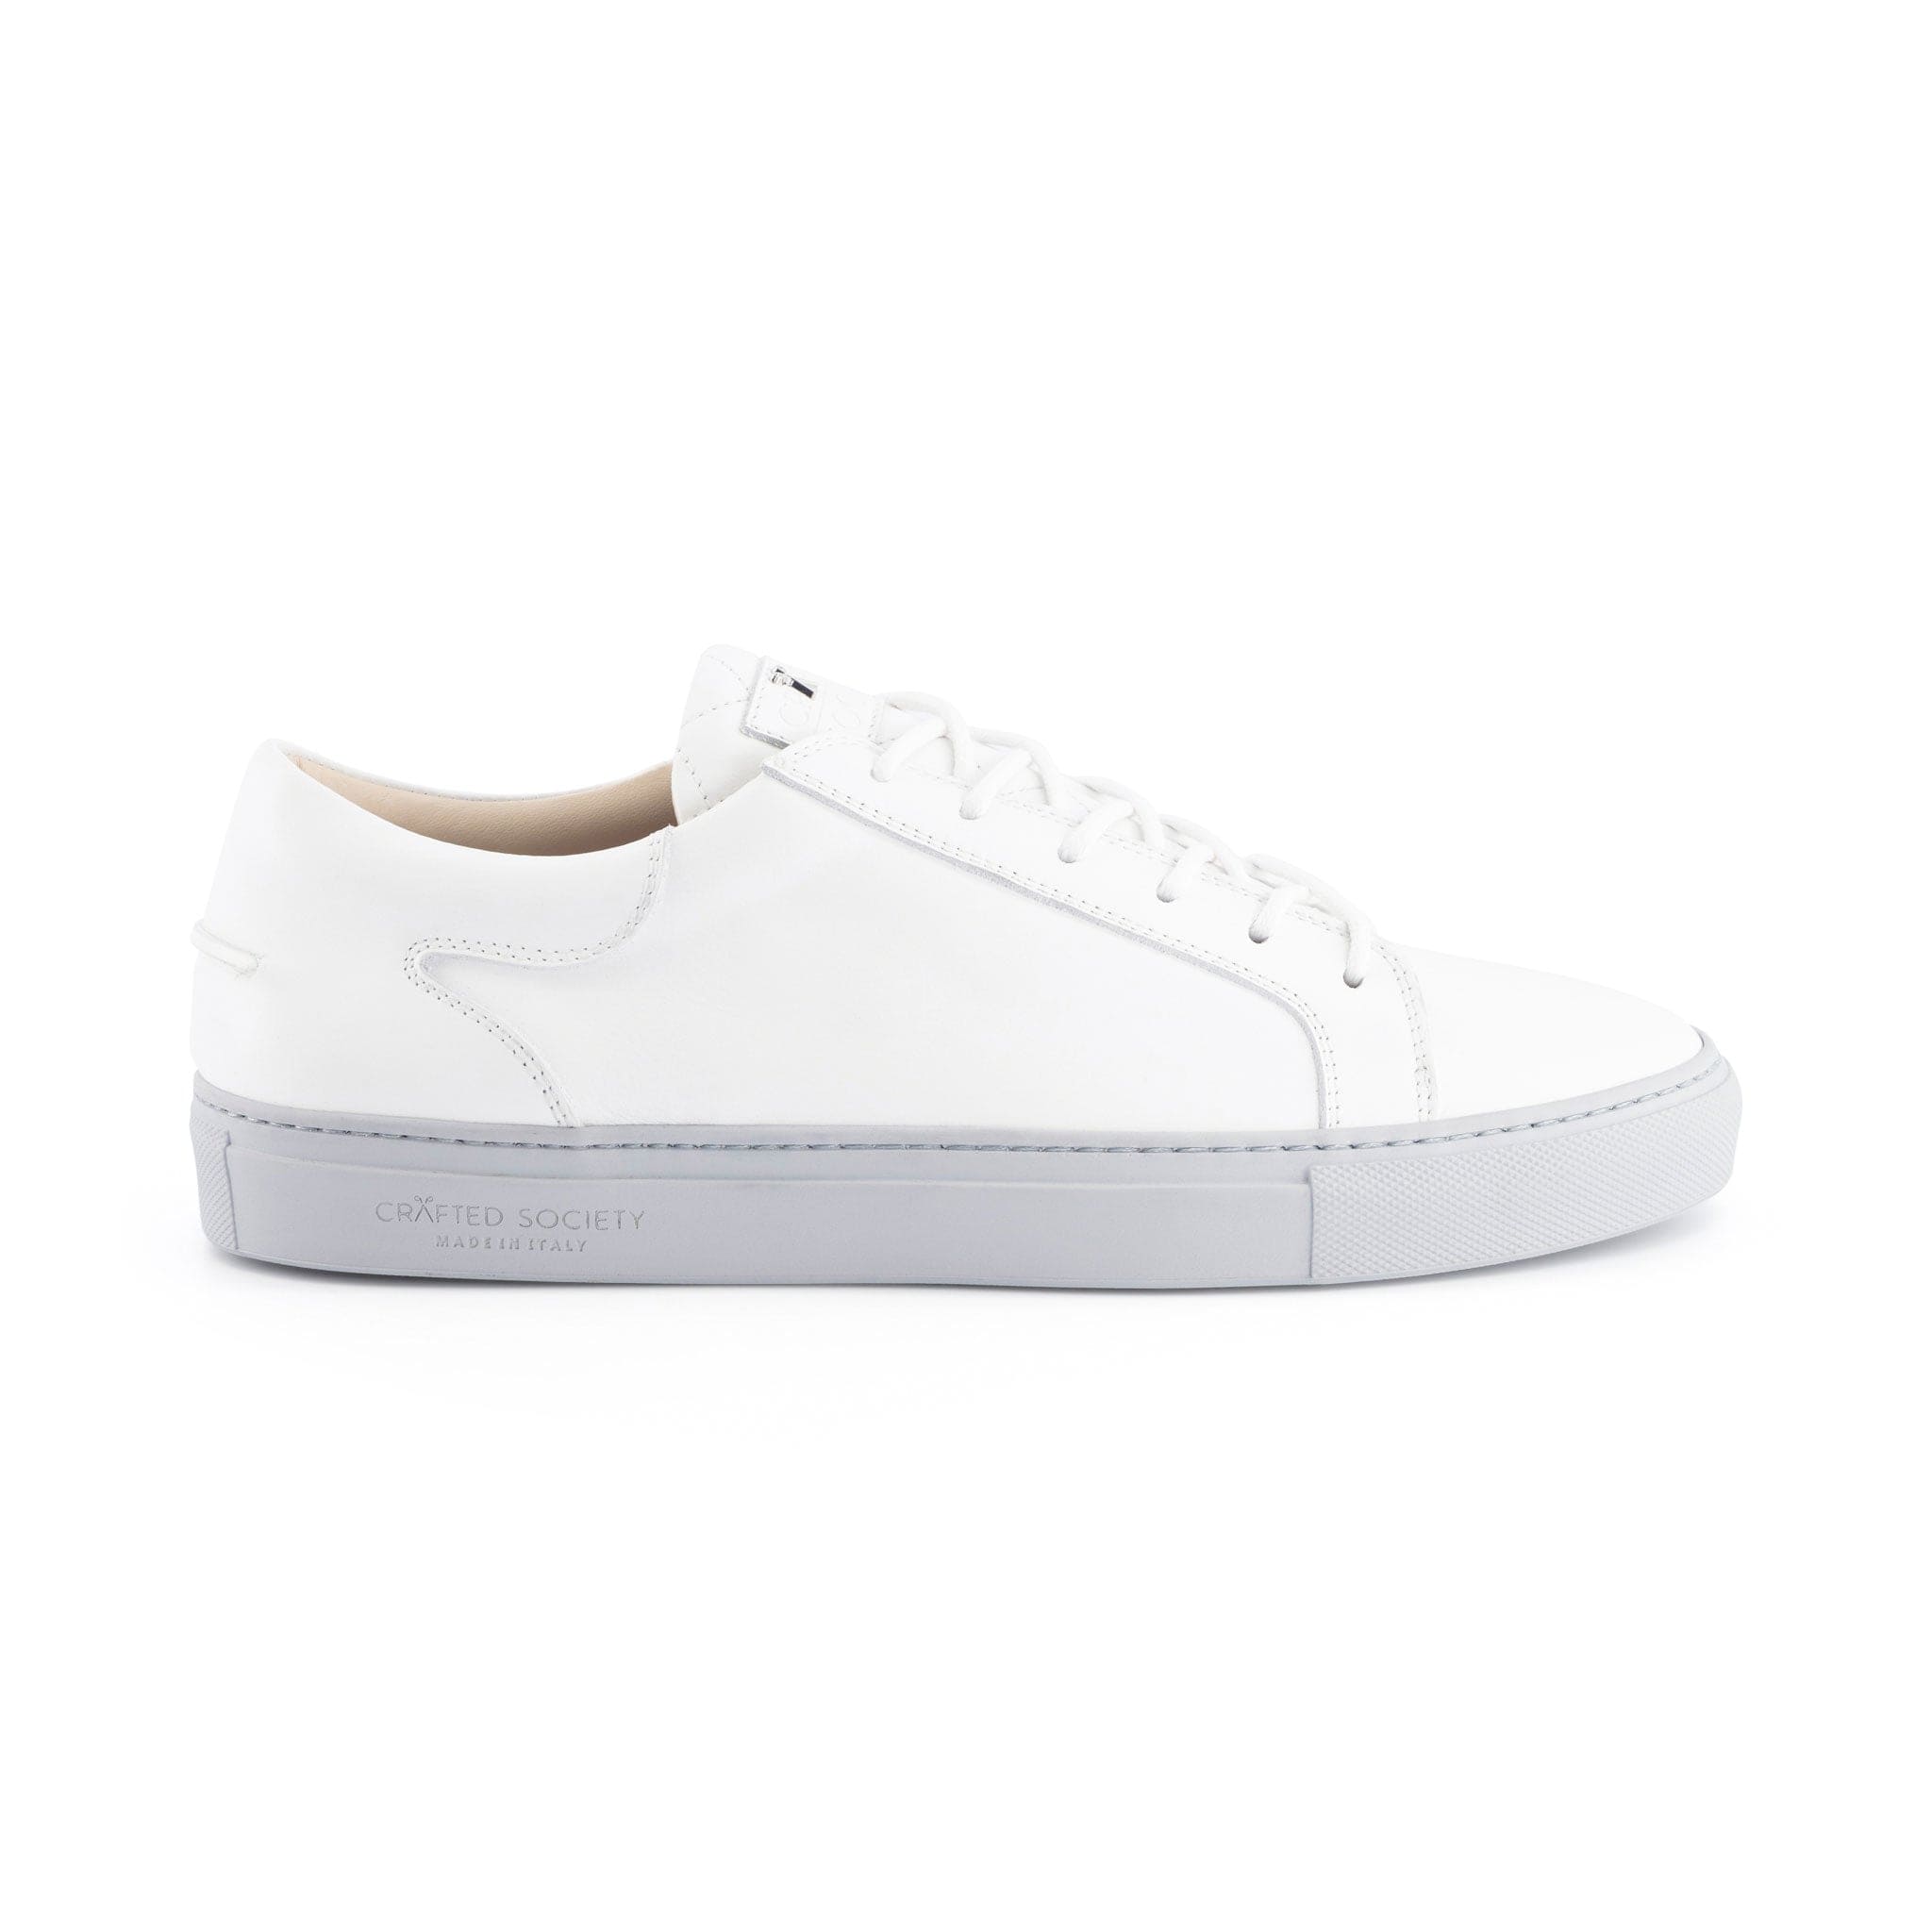 italian leather sneaker in white fullgrain leather with pearl grey outsole